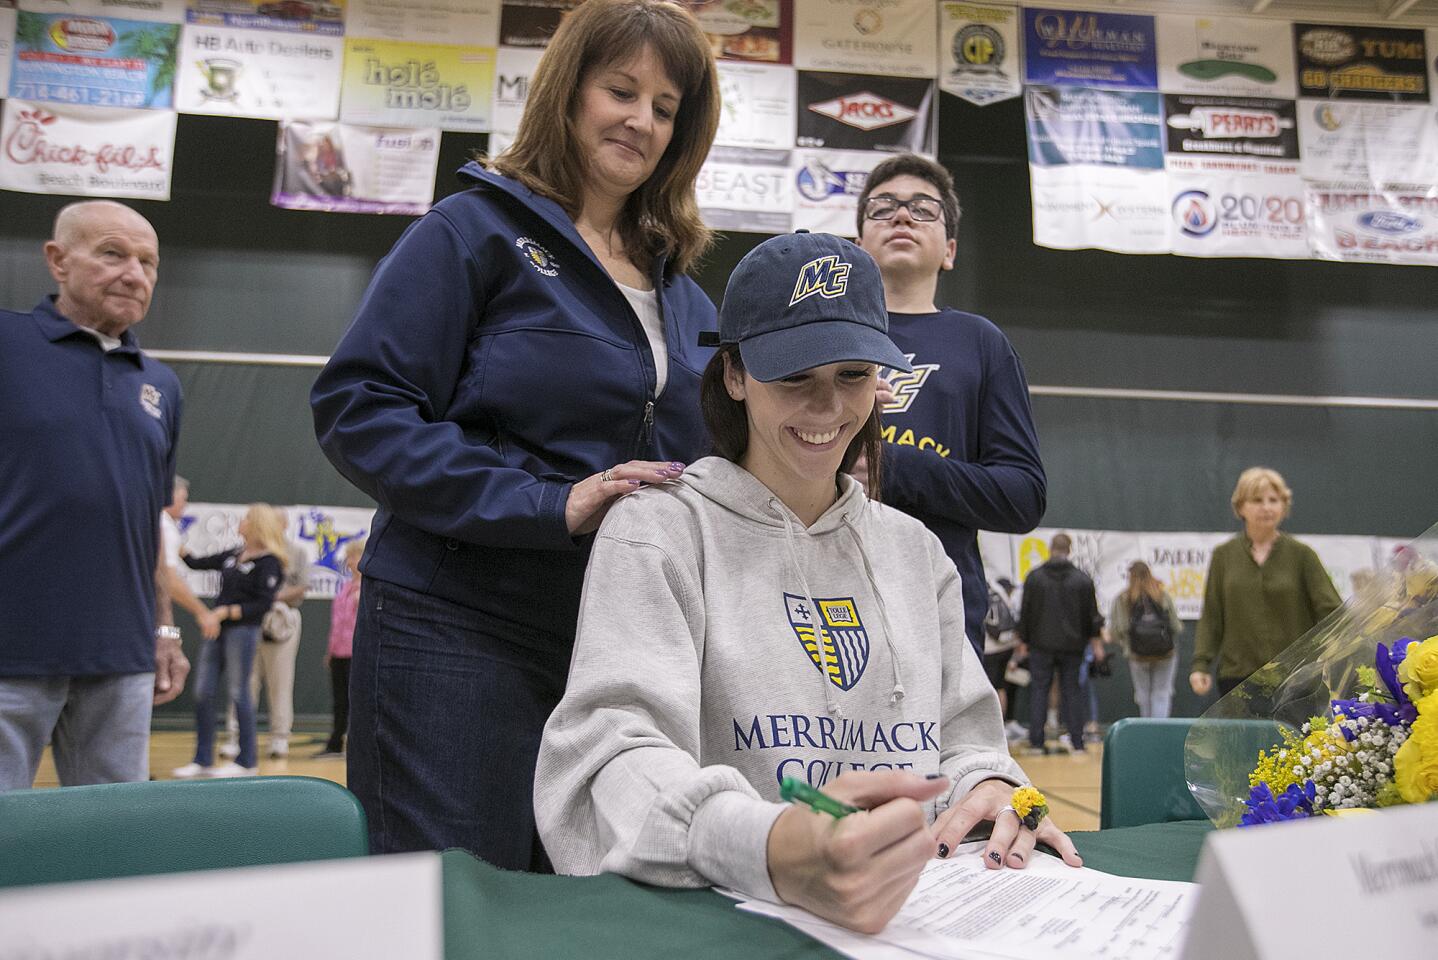 Michele Leestma and her son Sawyer, right, watch as her daughter Brooke signs her acceptance to Merrimack College during National Signing Day at Edison High School on Wednesday, April 11.